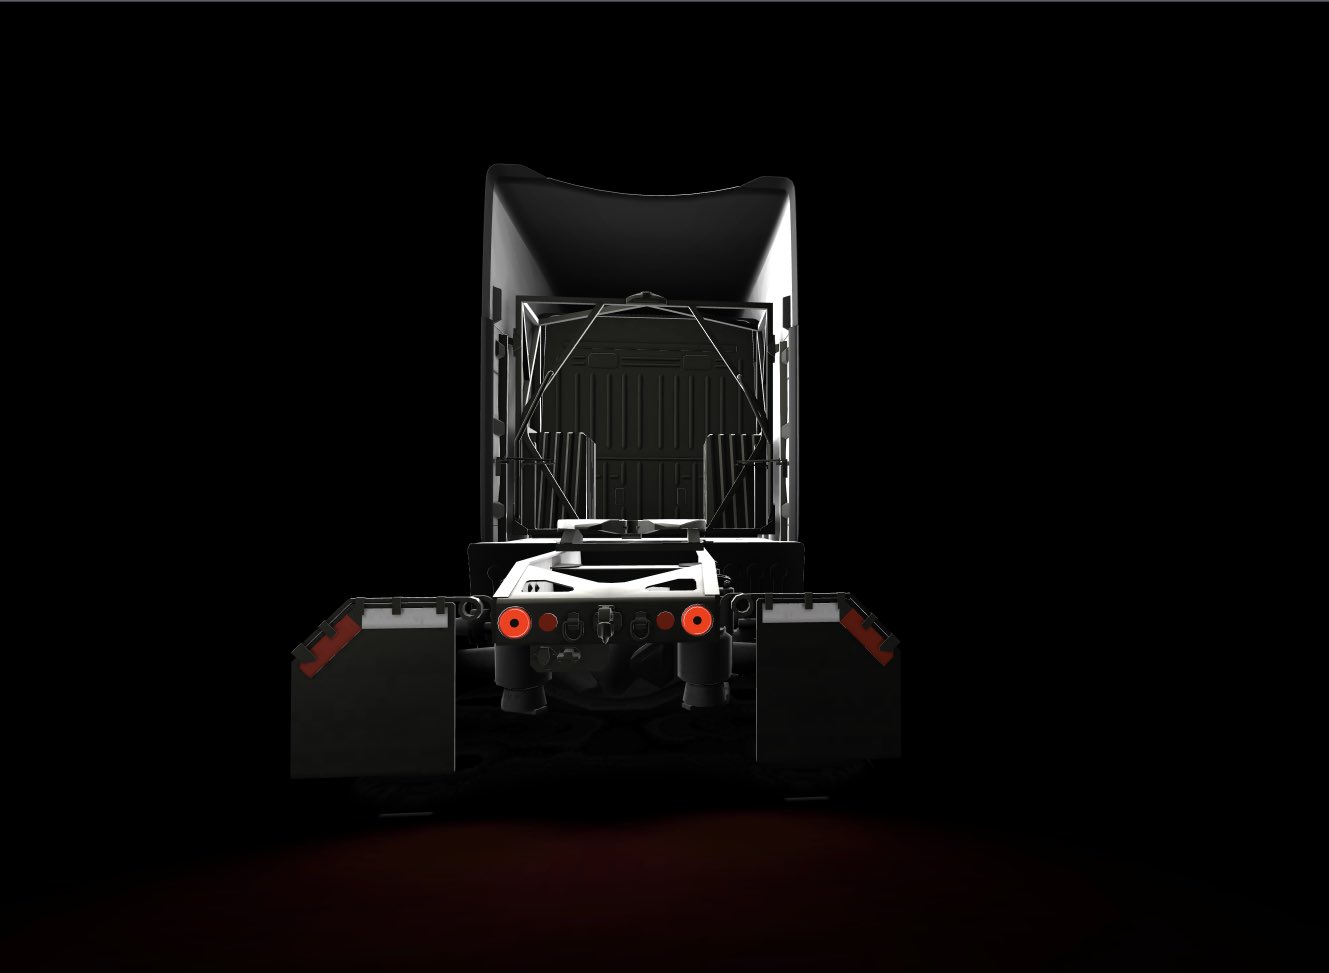 Tesla has added 3D models of the Tesla Semi to its app